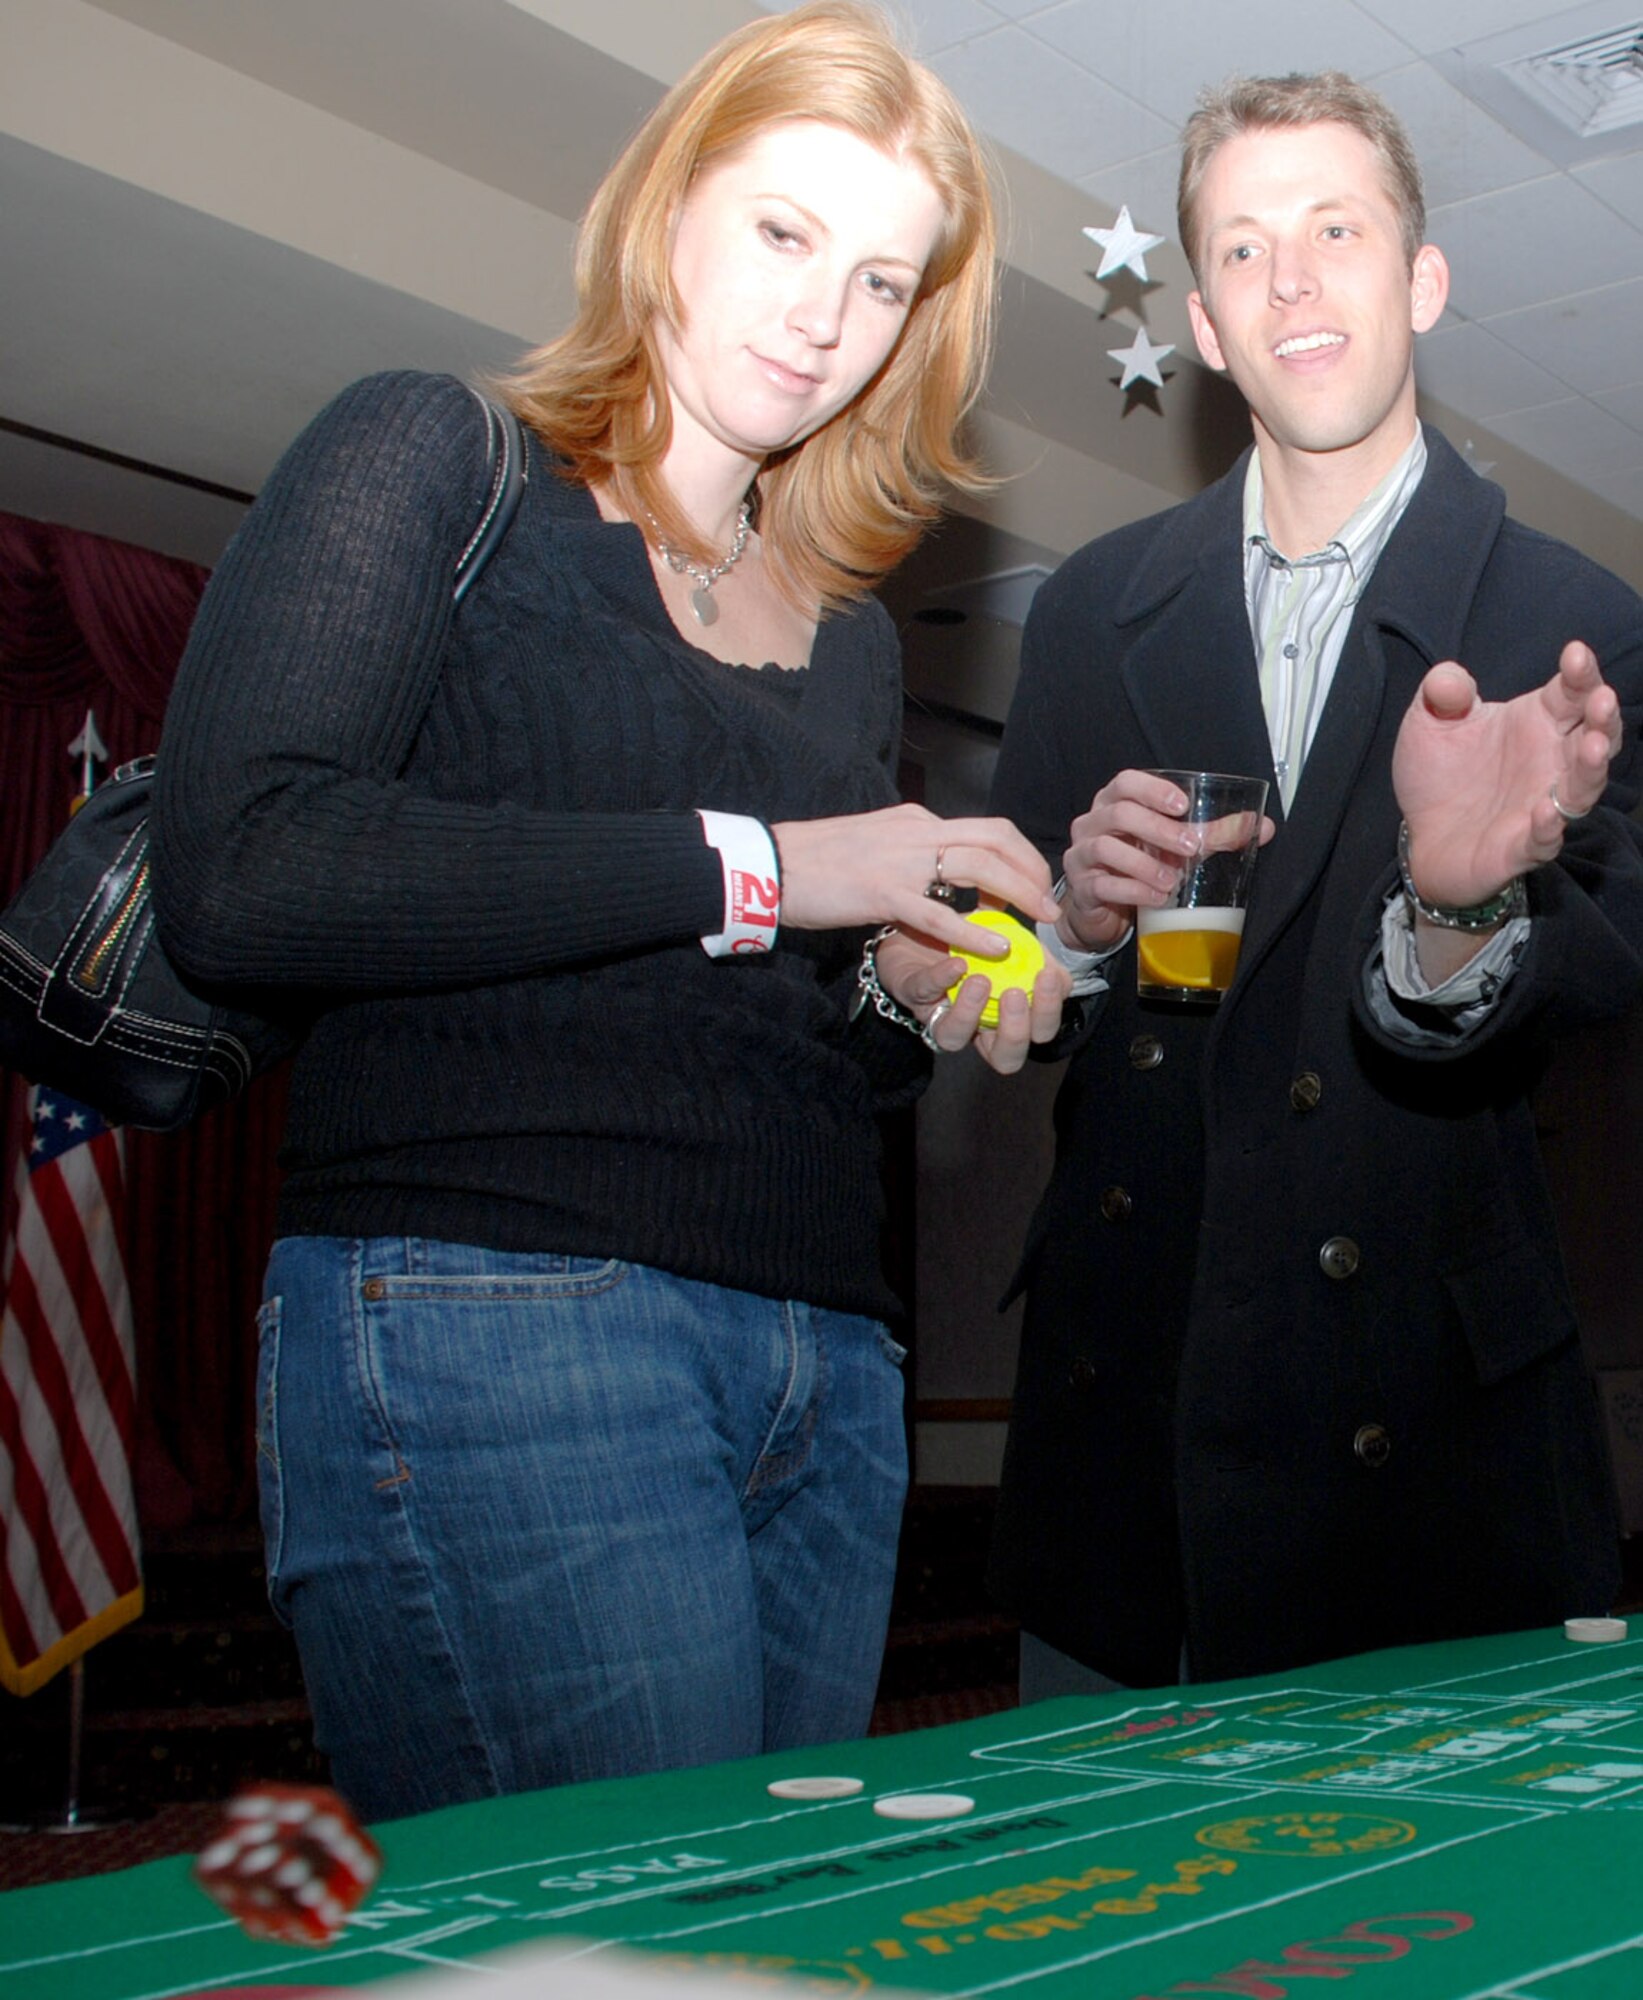 Capt. Jason Richter, 90th Medical Support Squadron, and his wife, Chrissy, participate in a game of craps.